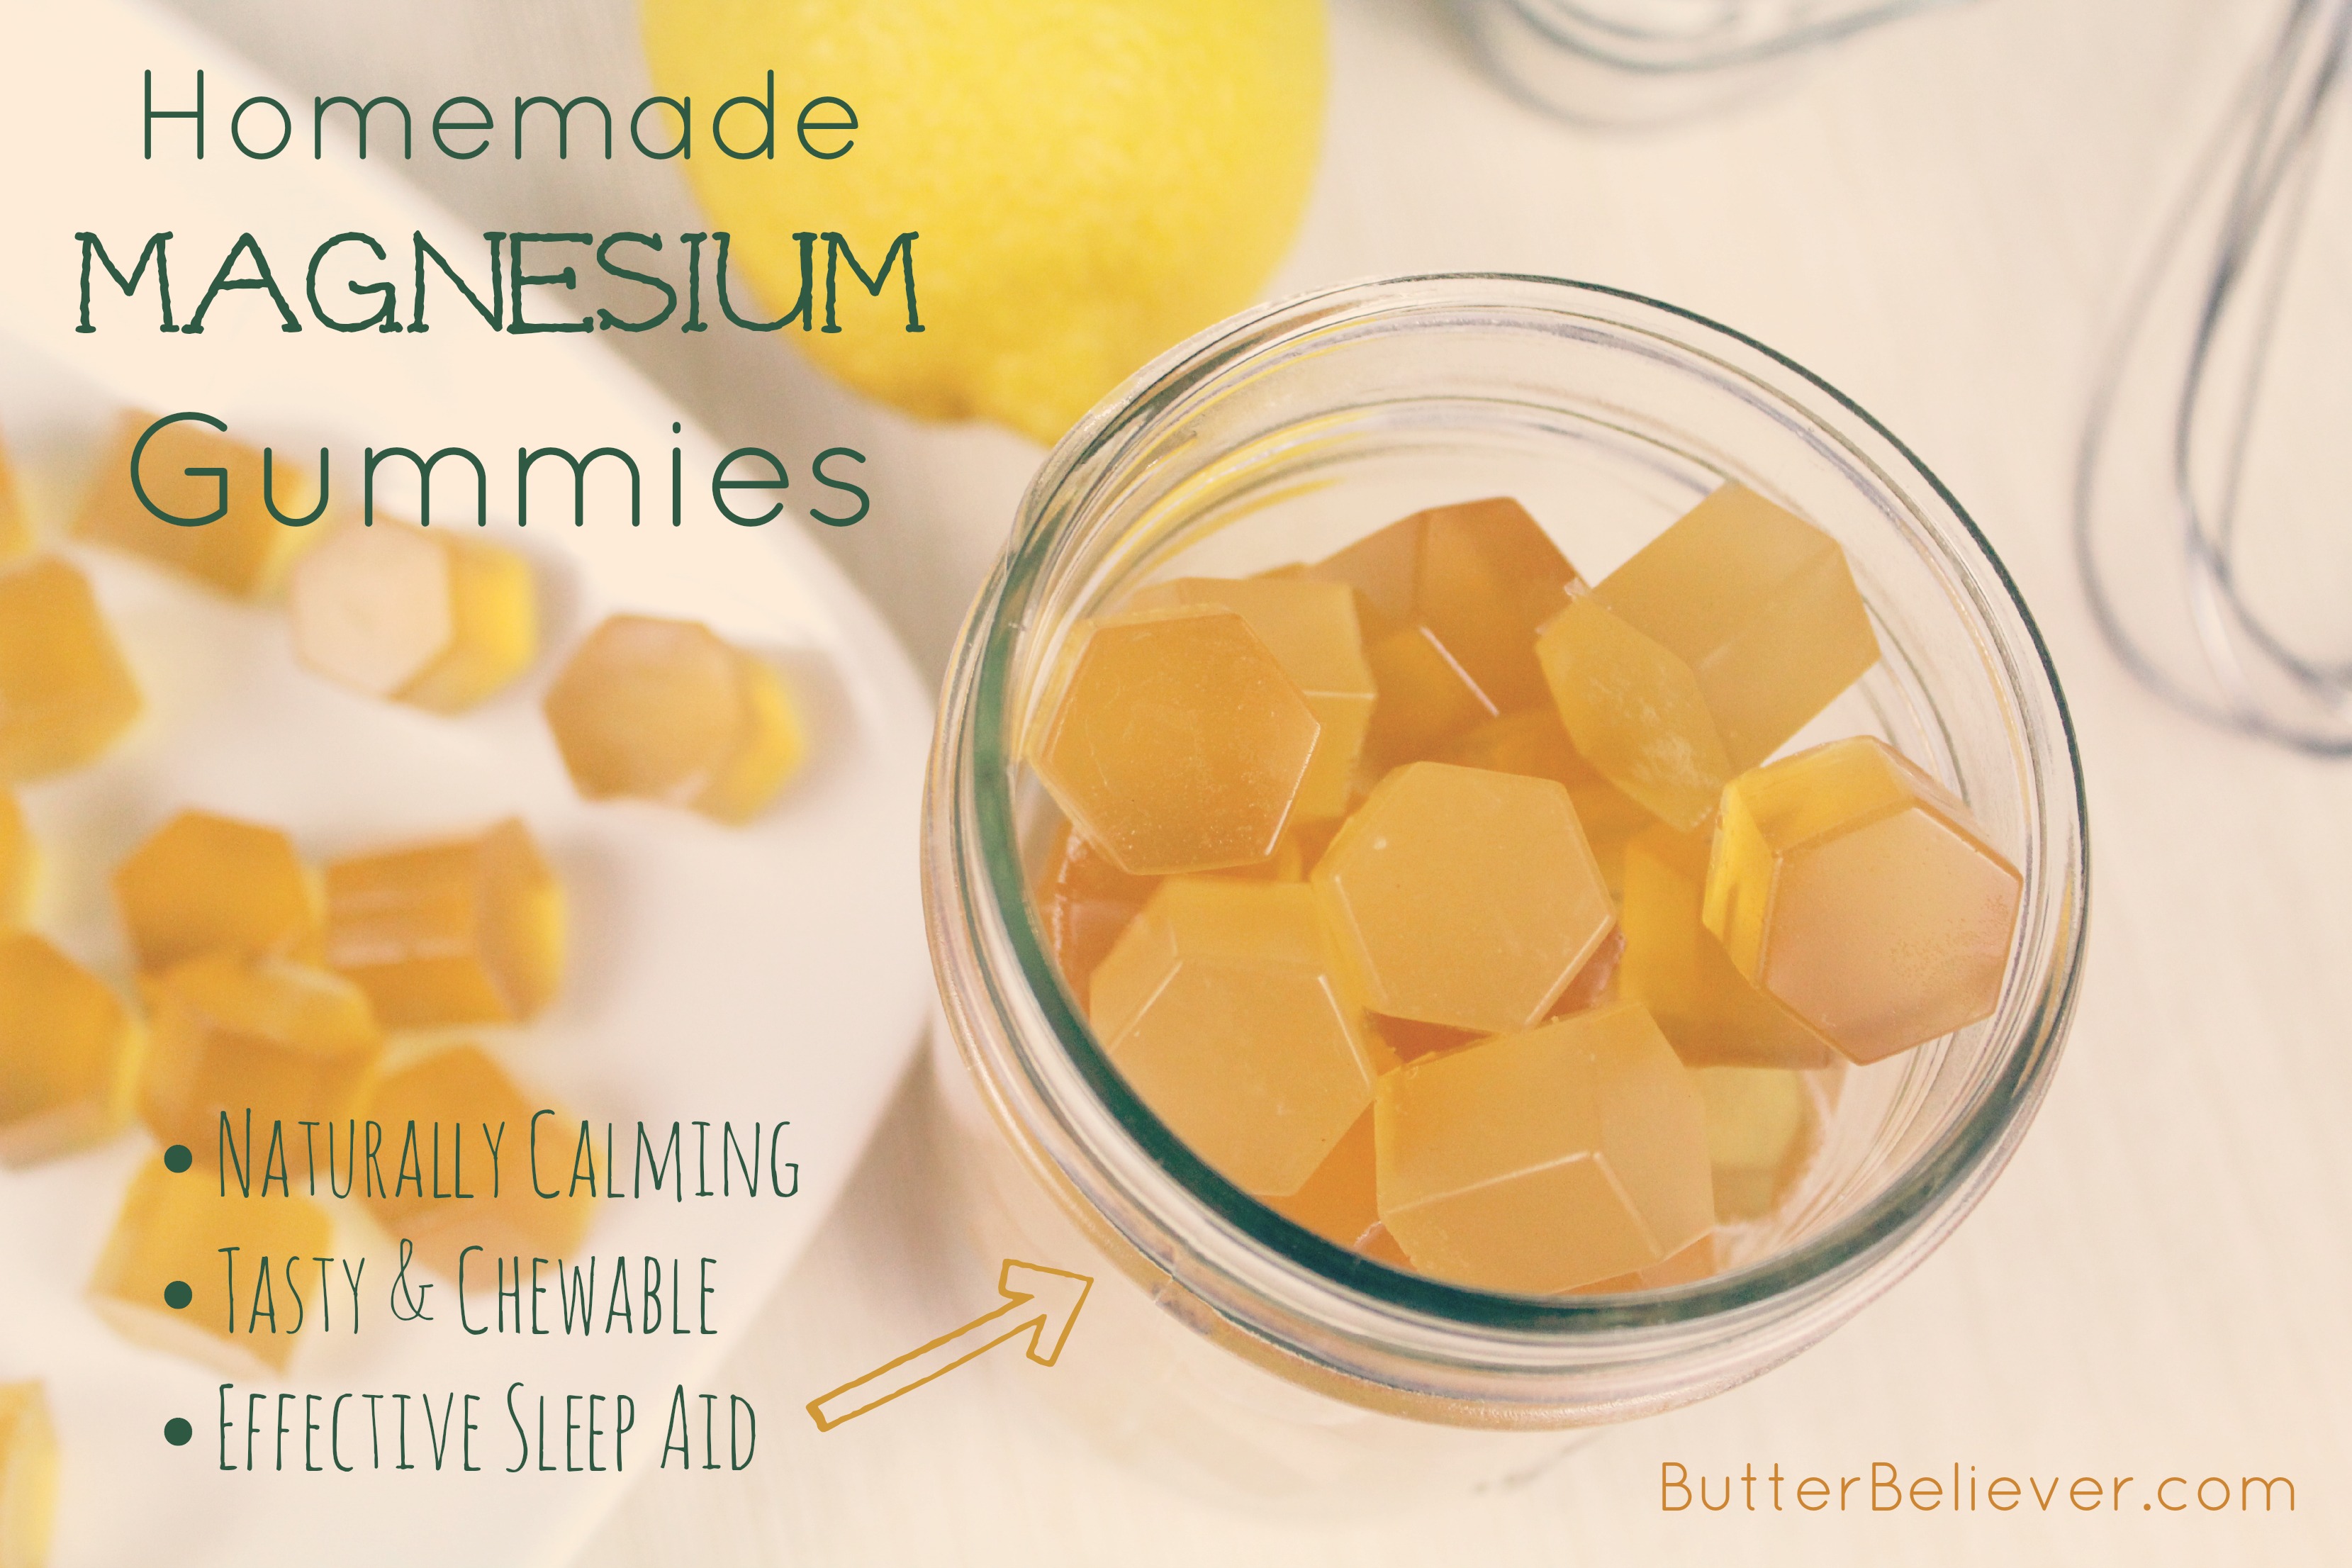 homemade magnesium gummies—a chewable "chill pill" and natural sleep